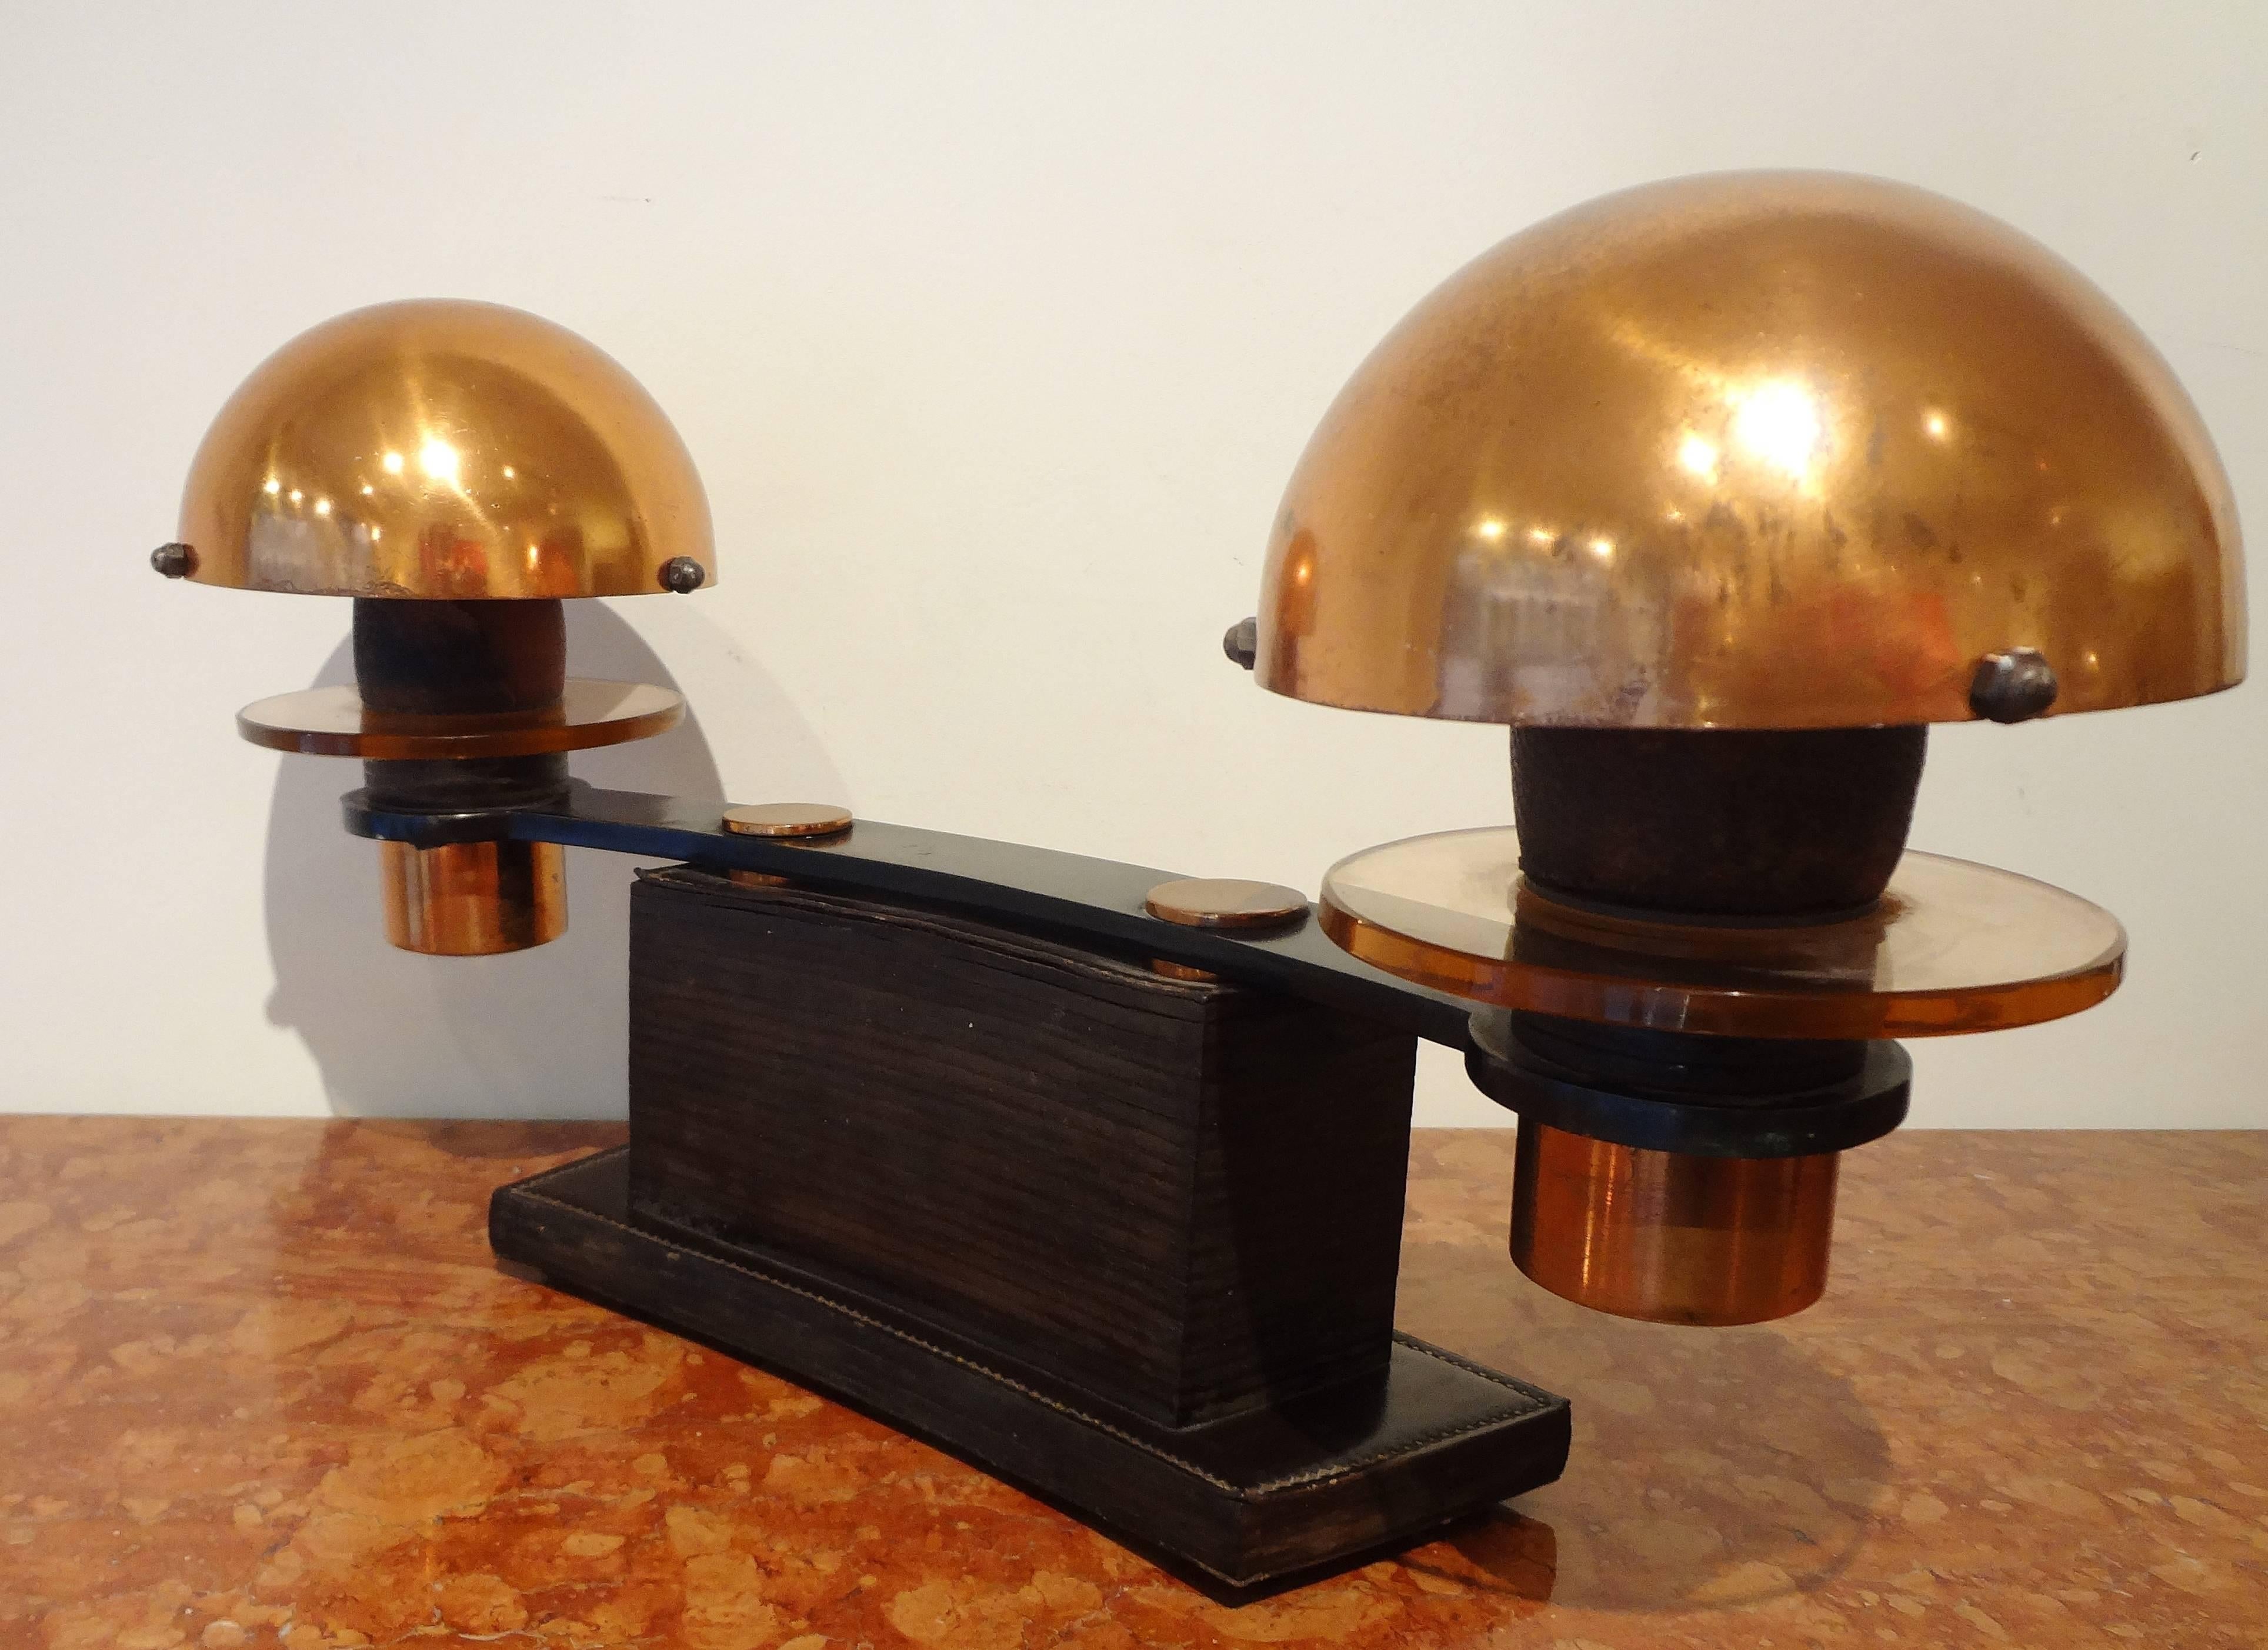 Paul Dupre-Lafon (1900-1971) et Maison Hermes.
Rare double leather and wood table lamp, 1930s, by Paul Dupré-Lafon.
With two half-spherical brass reflectors, two amber glass disks and leather gained curved base.
Signed Hermes.
Referenced in